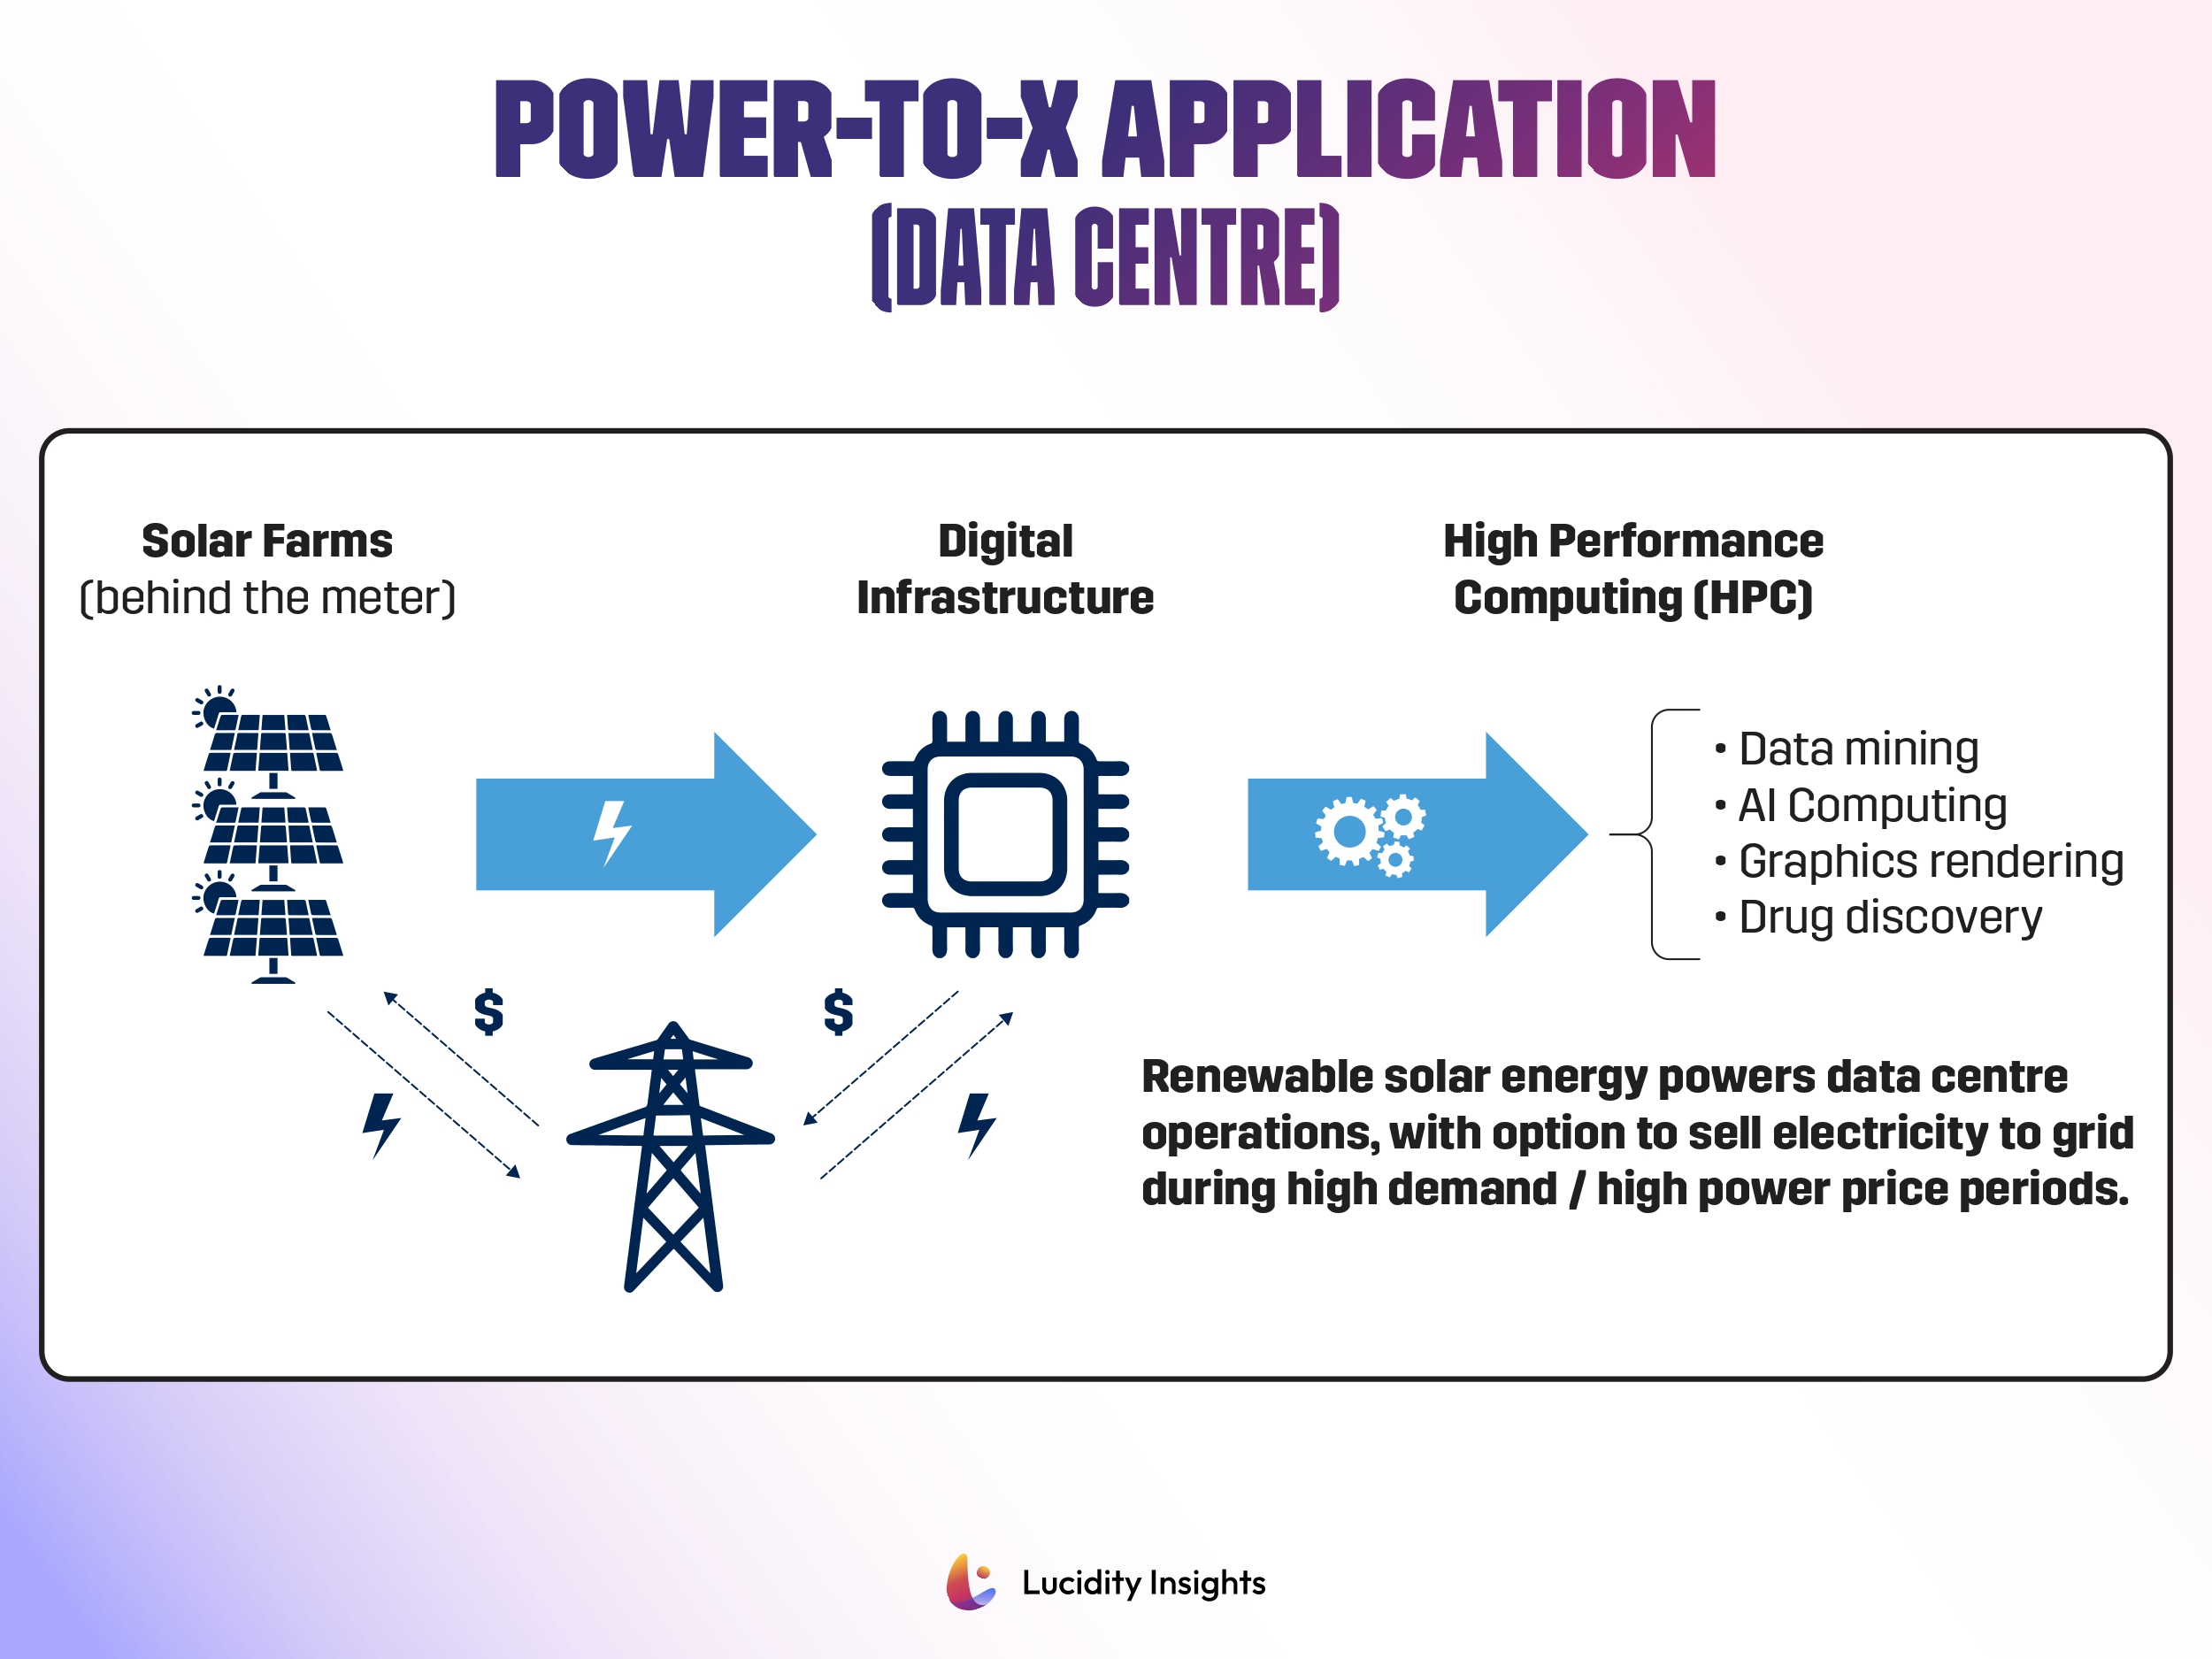 Power-to-X Applications (Data Centre)